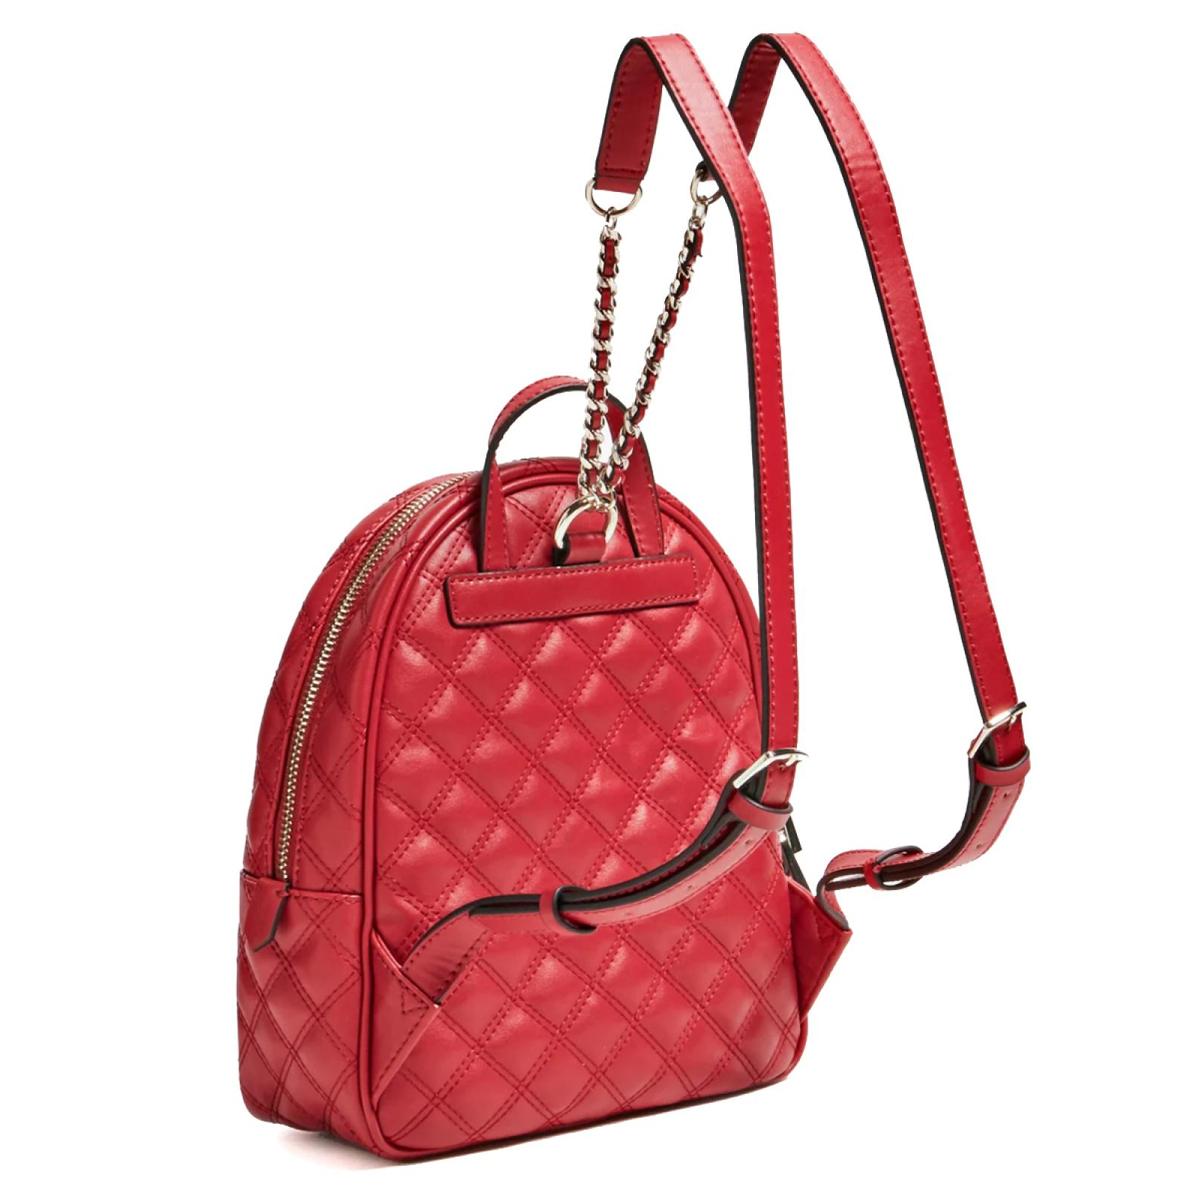 Guess red quilted logo MINI backpack purse for Sale in Nutley, NJ - OfferUp